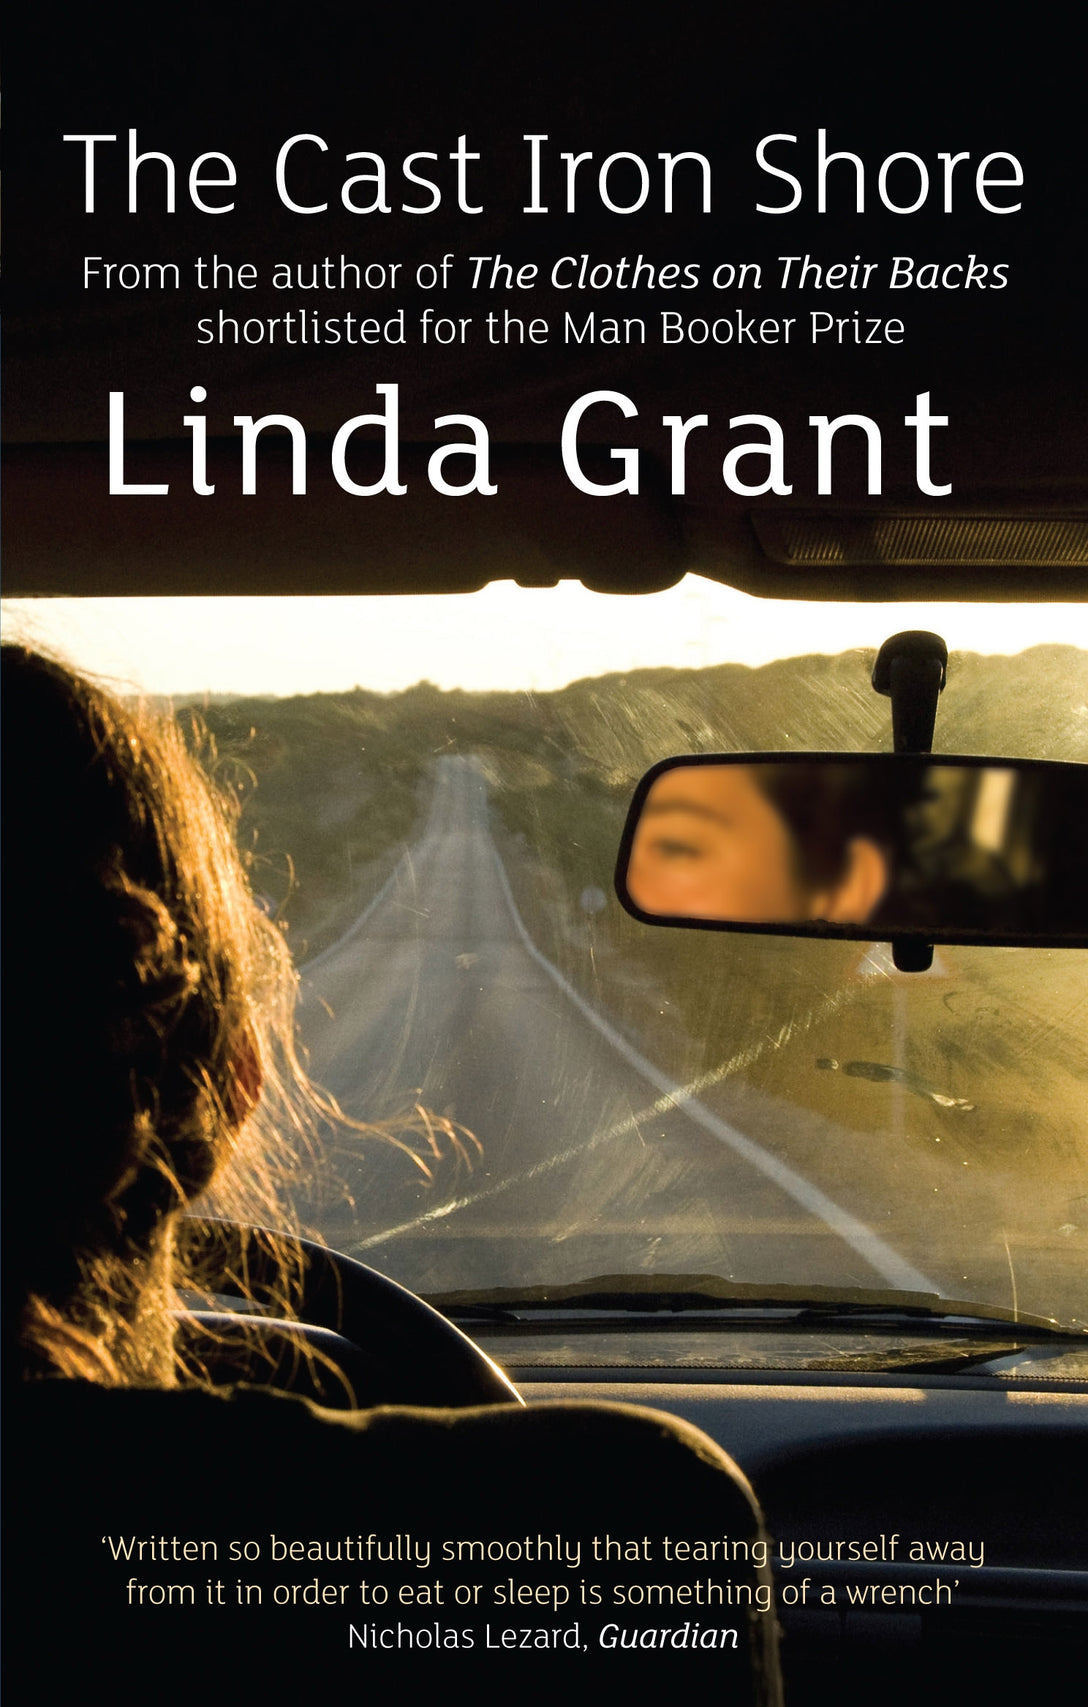 The Cast Iron Shore by Linda Grant